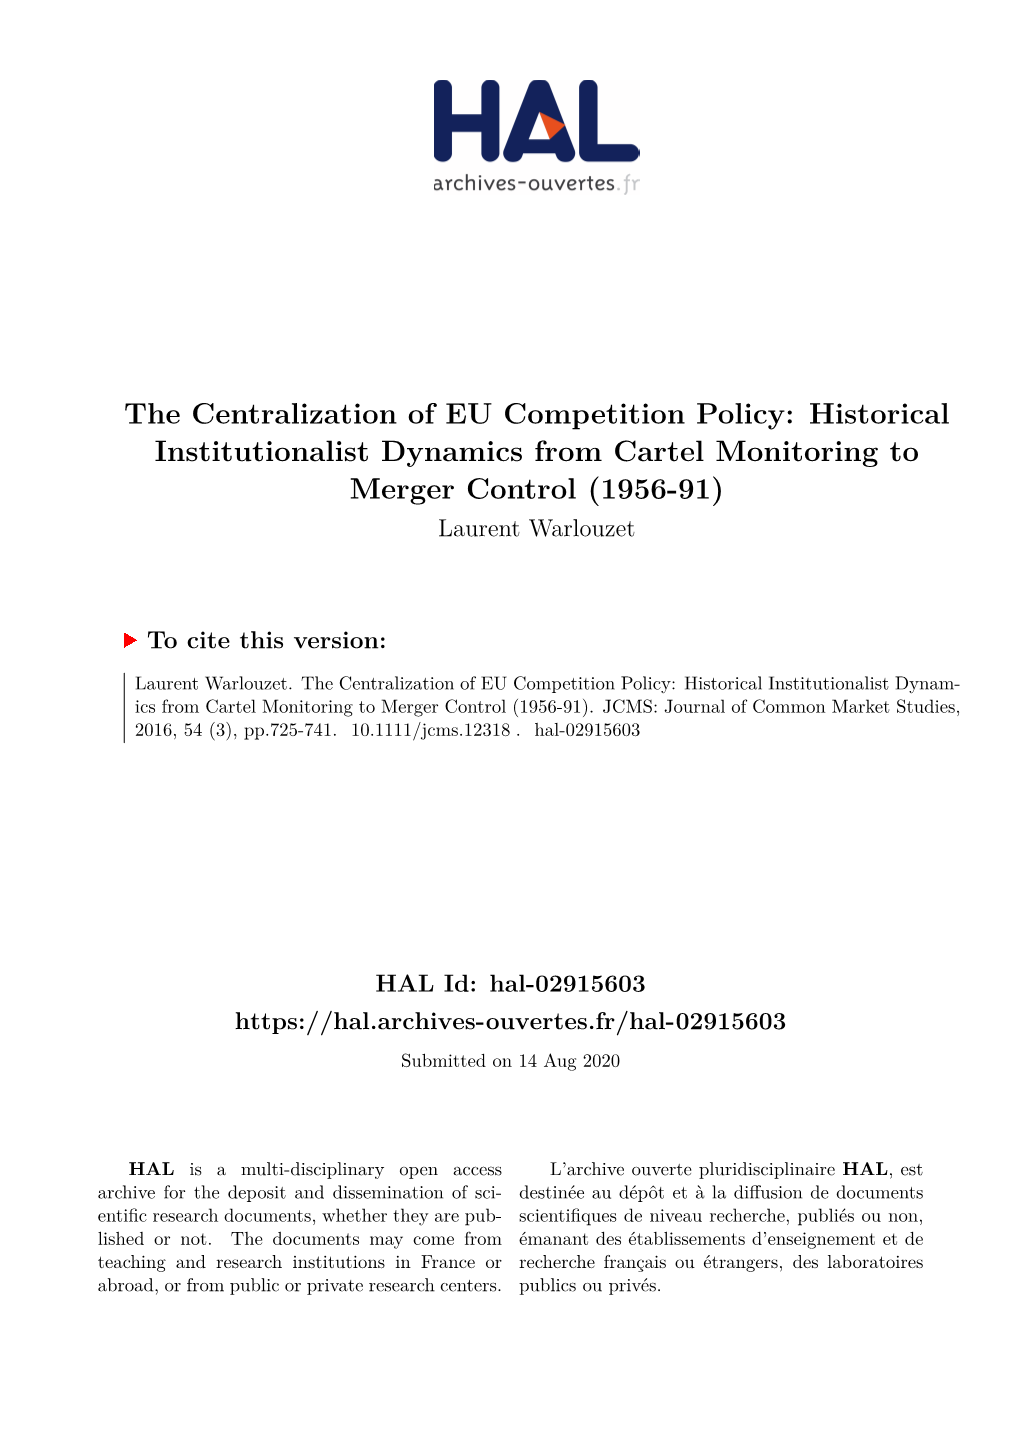 The Centralization of EU Competition Policy: Historical Institutionalist Dynamics from Cartel Monitoring to Merger Control (1956-91) Laurent Warlouzet